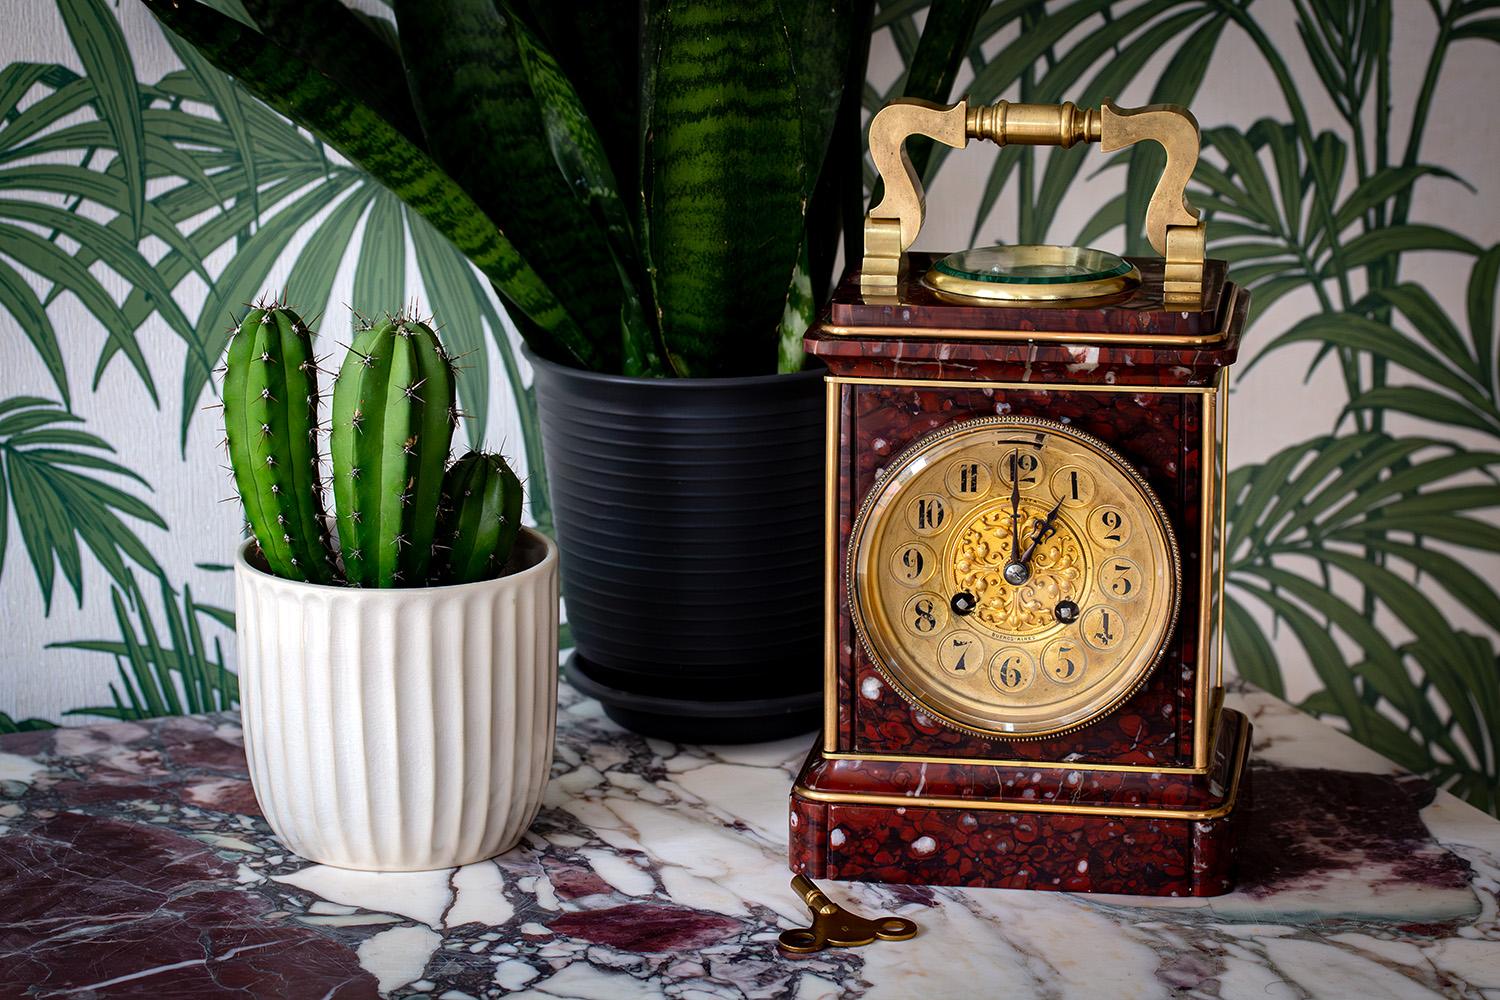 Fantastic French oversized carriage clock compendium. The carriage clock carved out of red (rouge) marble with a wide foot having a cavetto step with quadrant brass edging with an opposing matching top. The clock with an industrial oversized handle